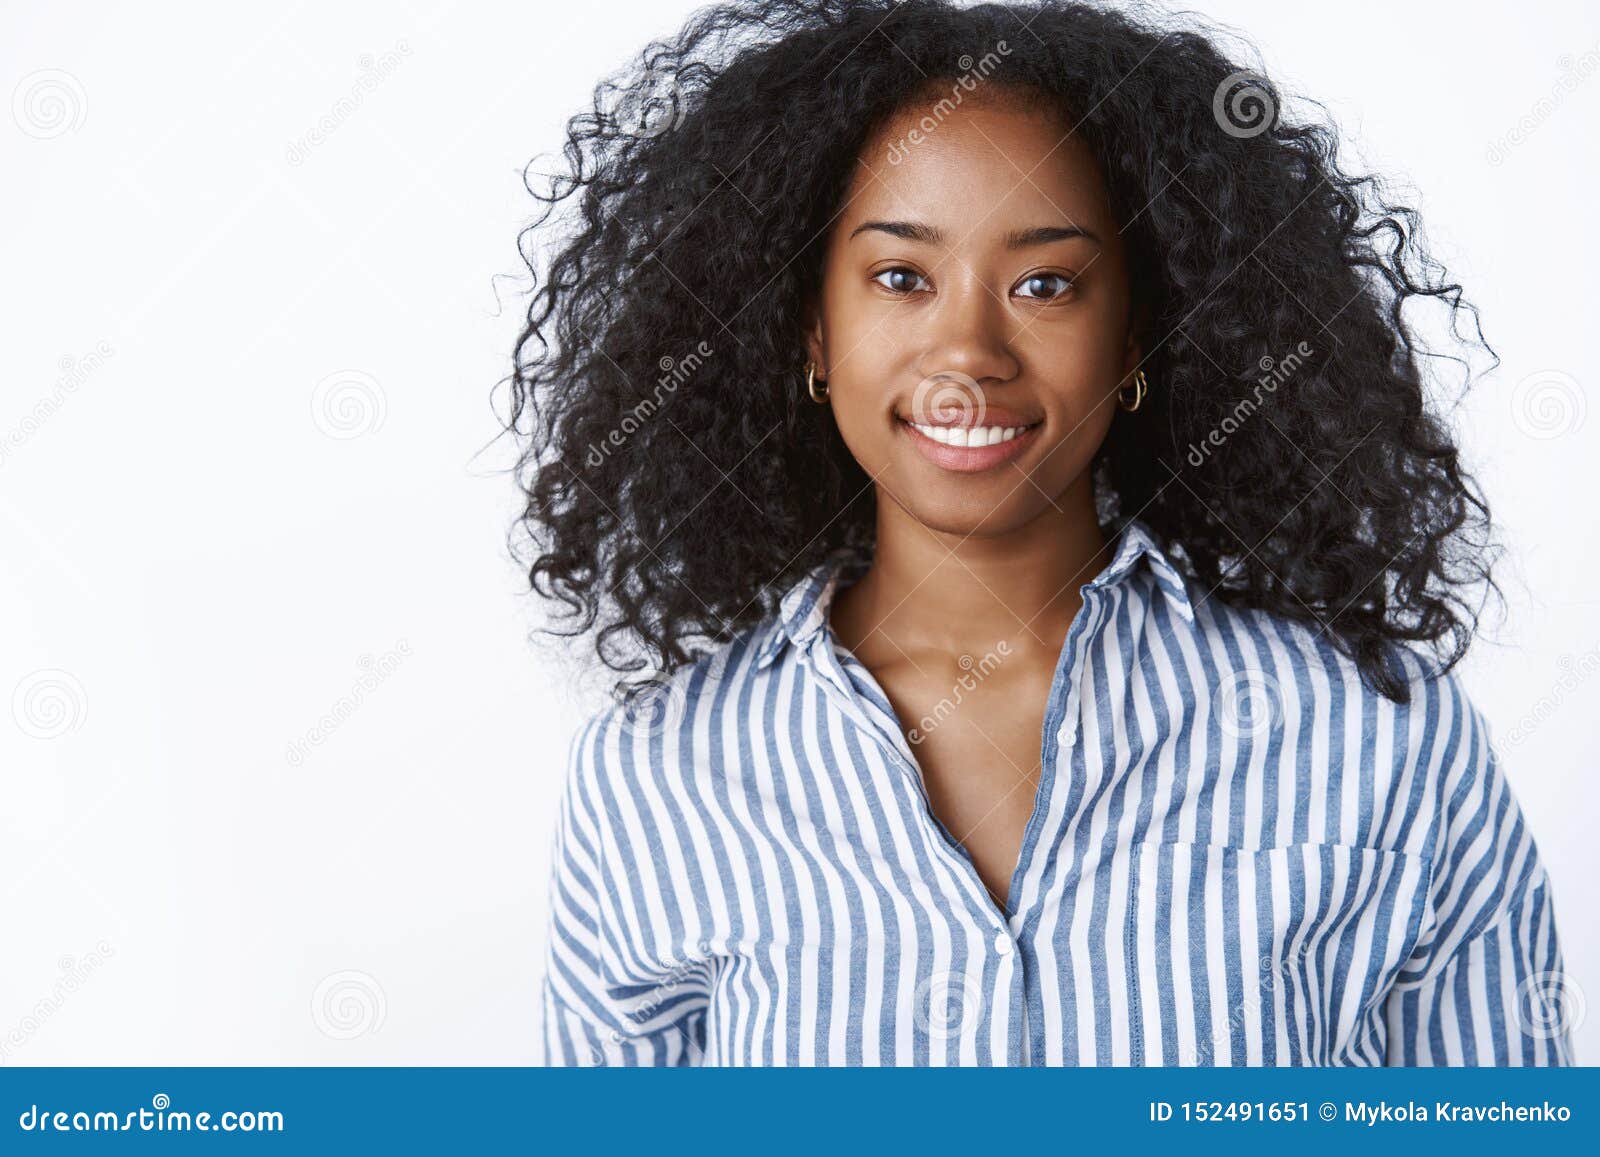 Gorgeous Friendly-looking Smiling Happy Dark-skinned Girl Afro Hairstyle  Wearing Office Striped Blouse Look Fashionable Stock Image - Image of  female, american: 152491651